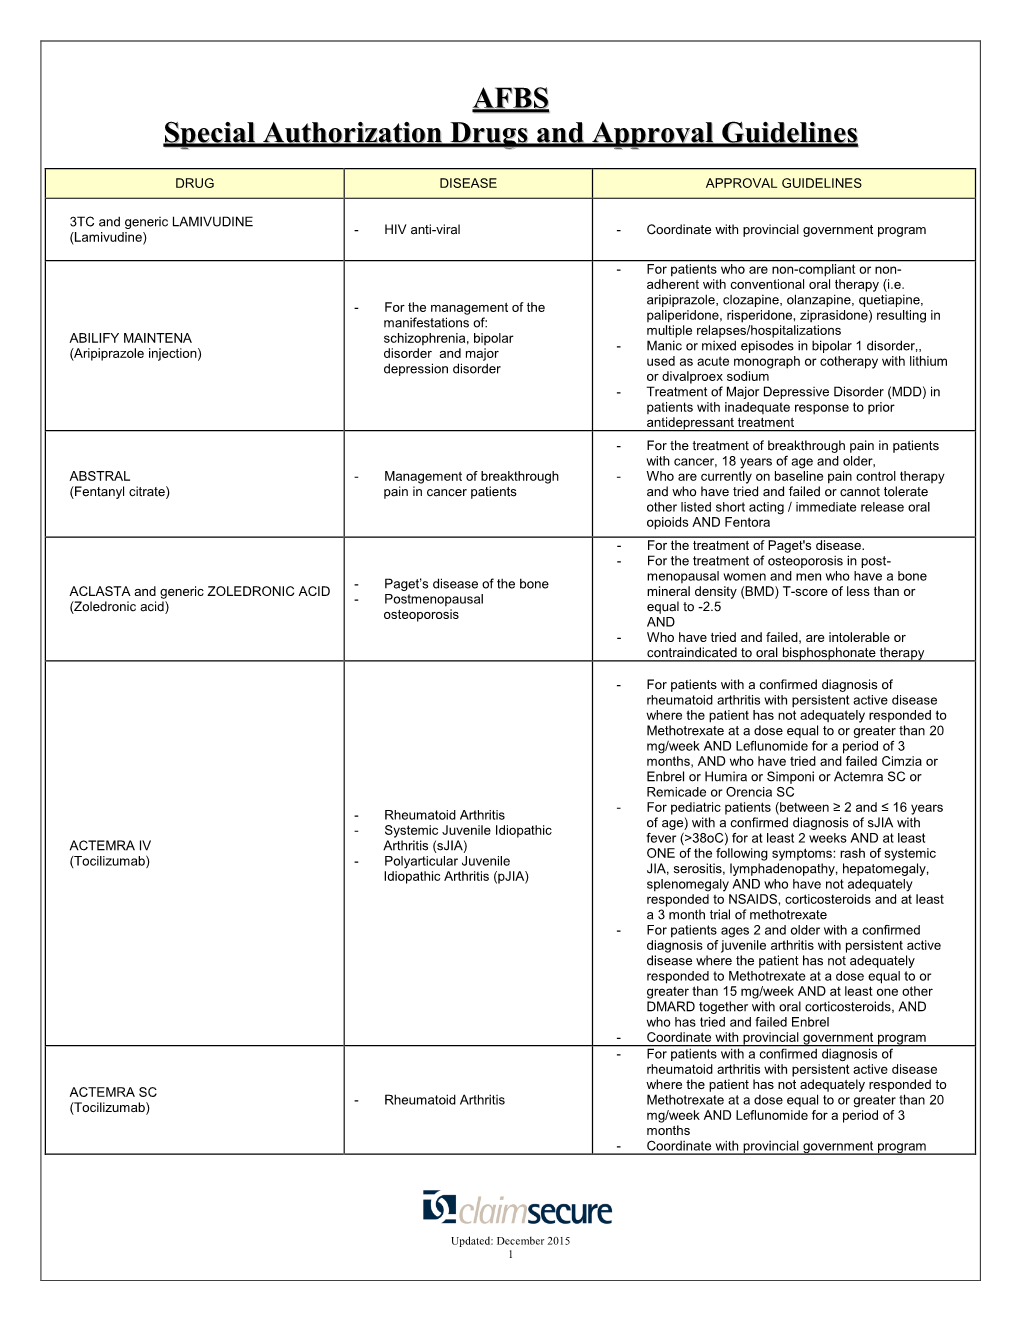 Special Authorization Drugs and Approval Guidelines